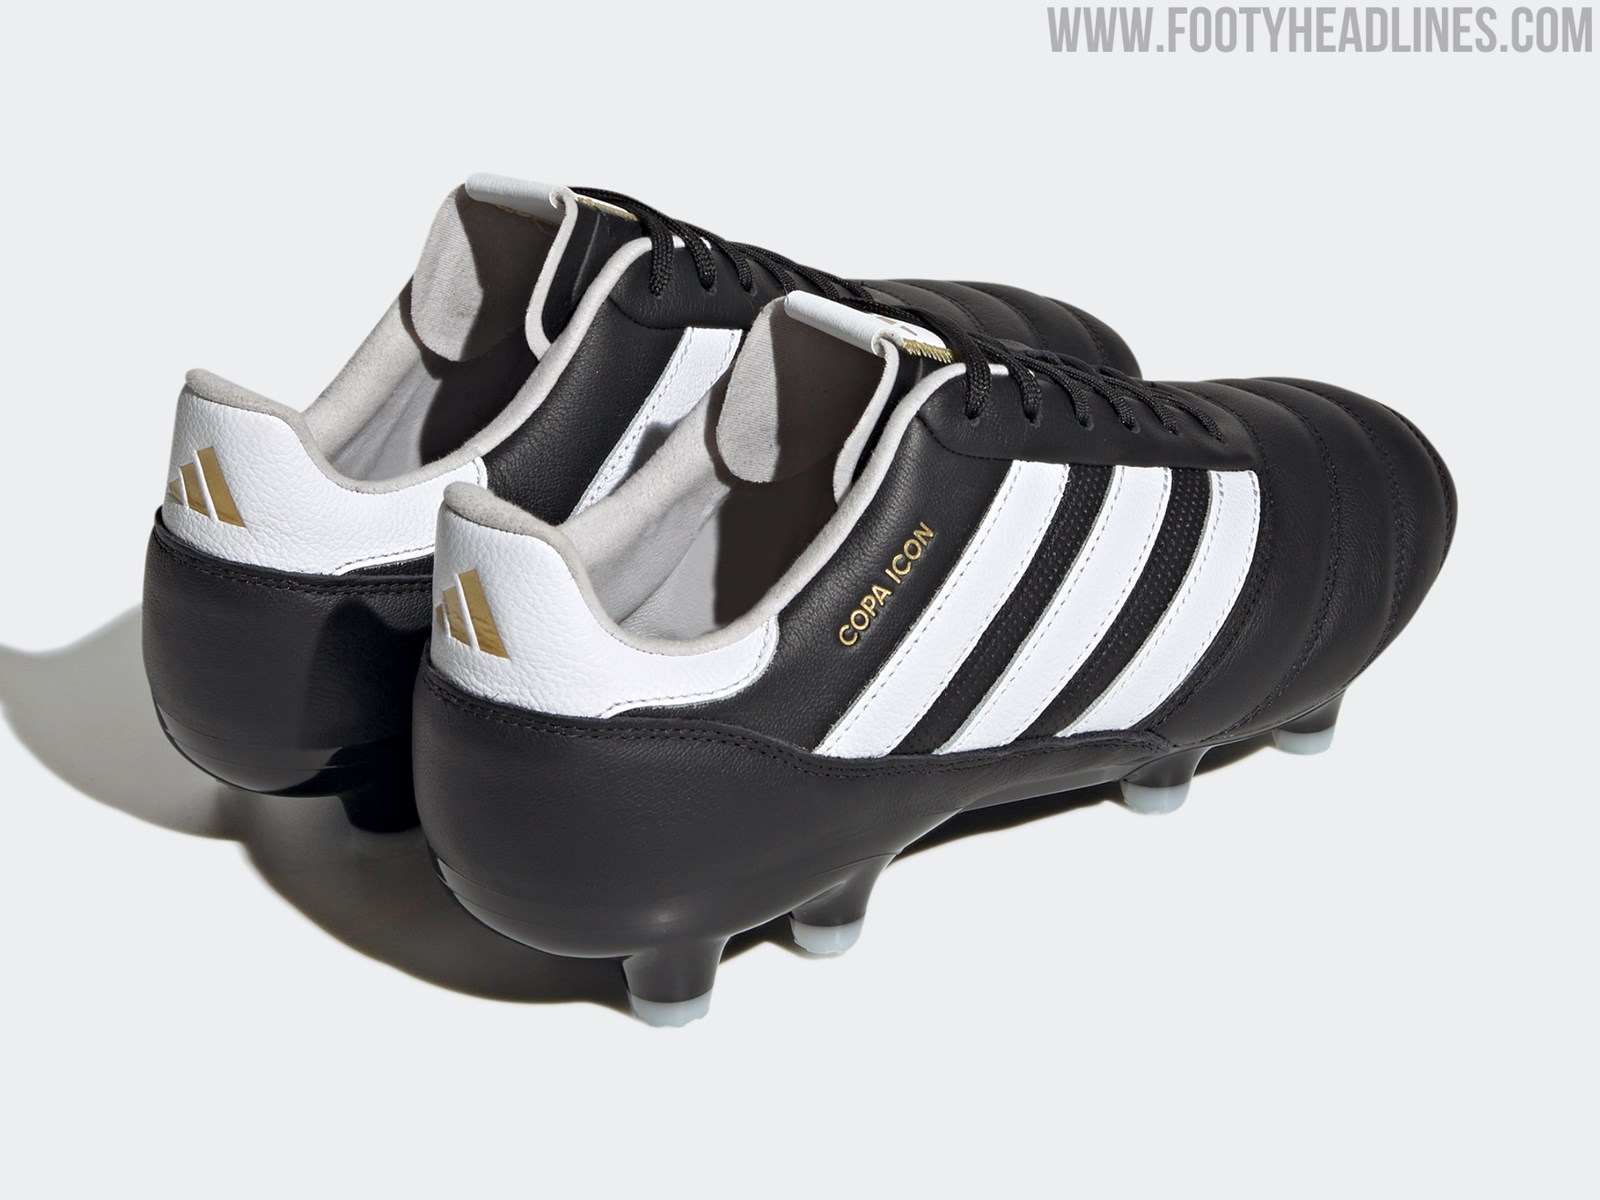 2023 Copa Mundial": All-New Adidas Copa Icon 2023 Boots Released - Footy